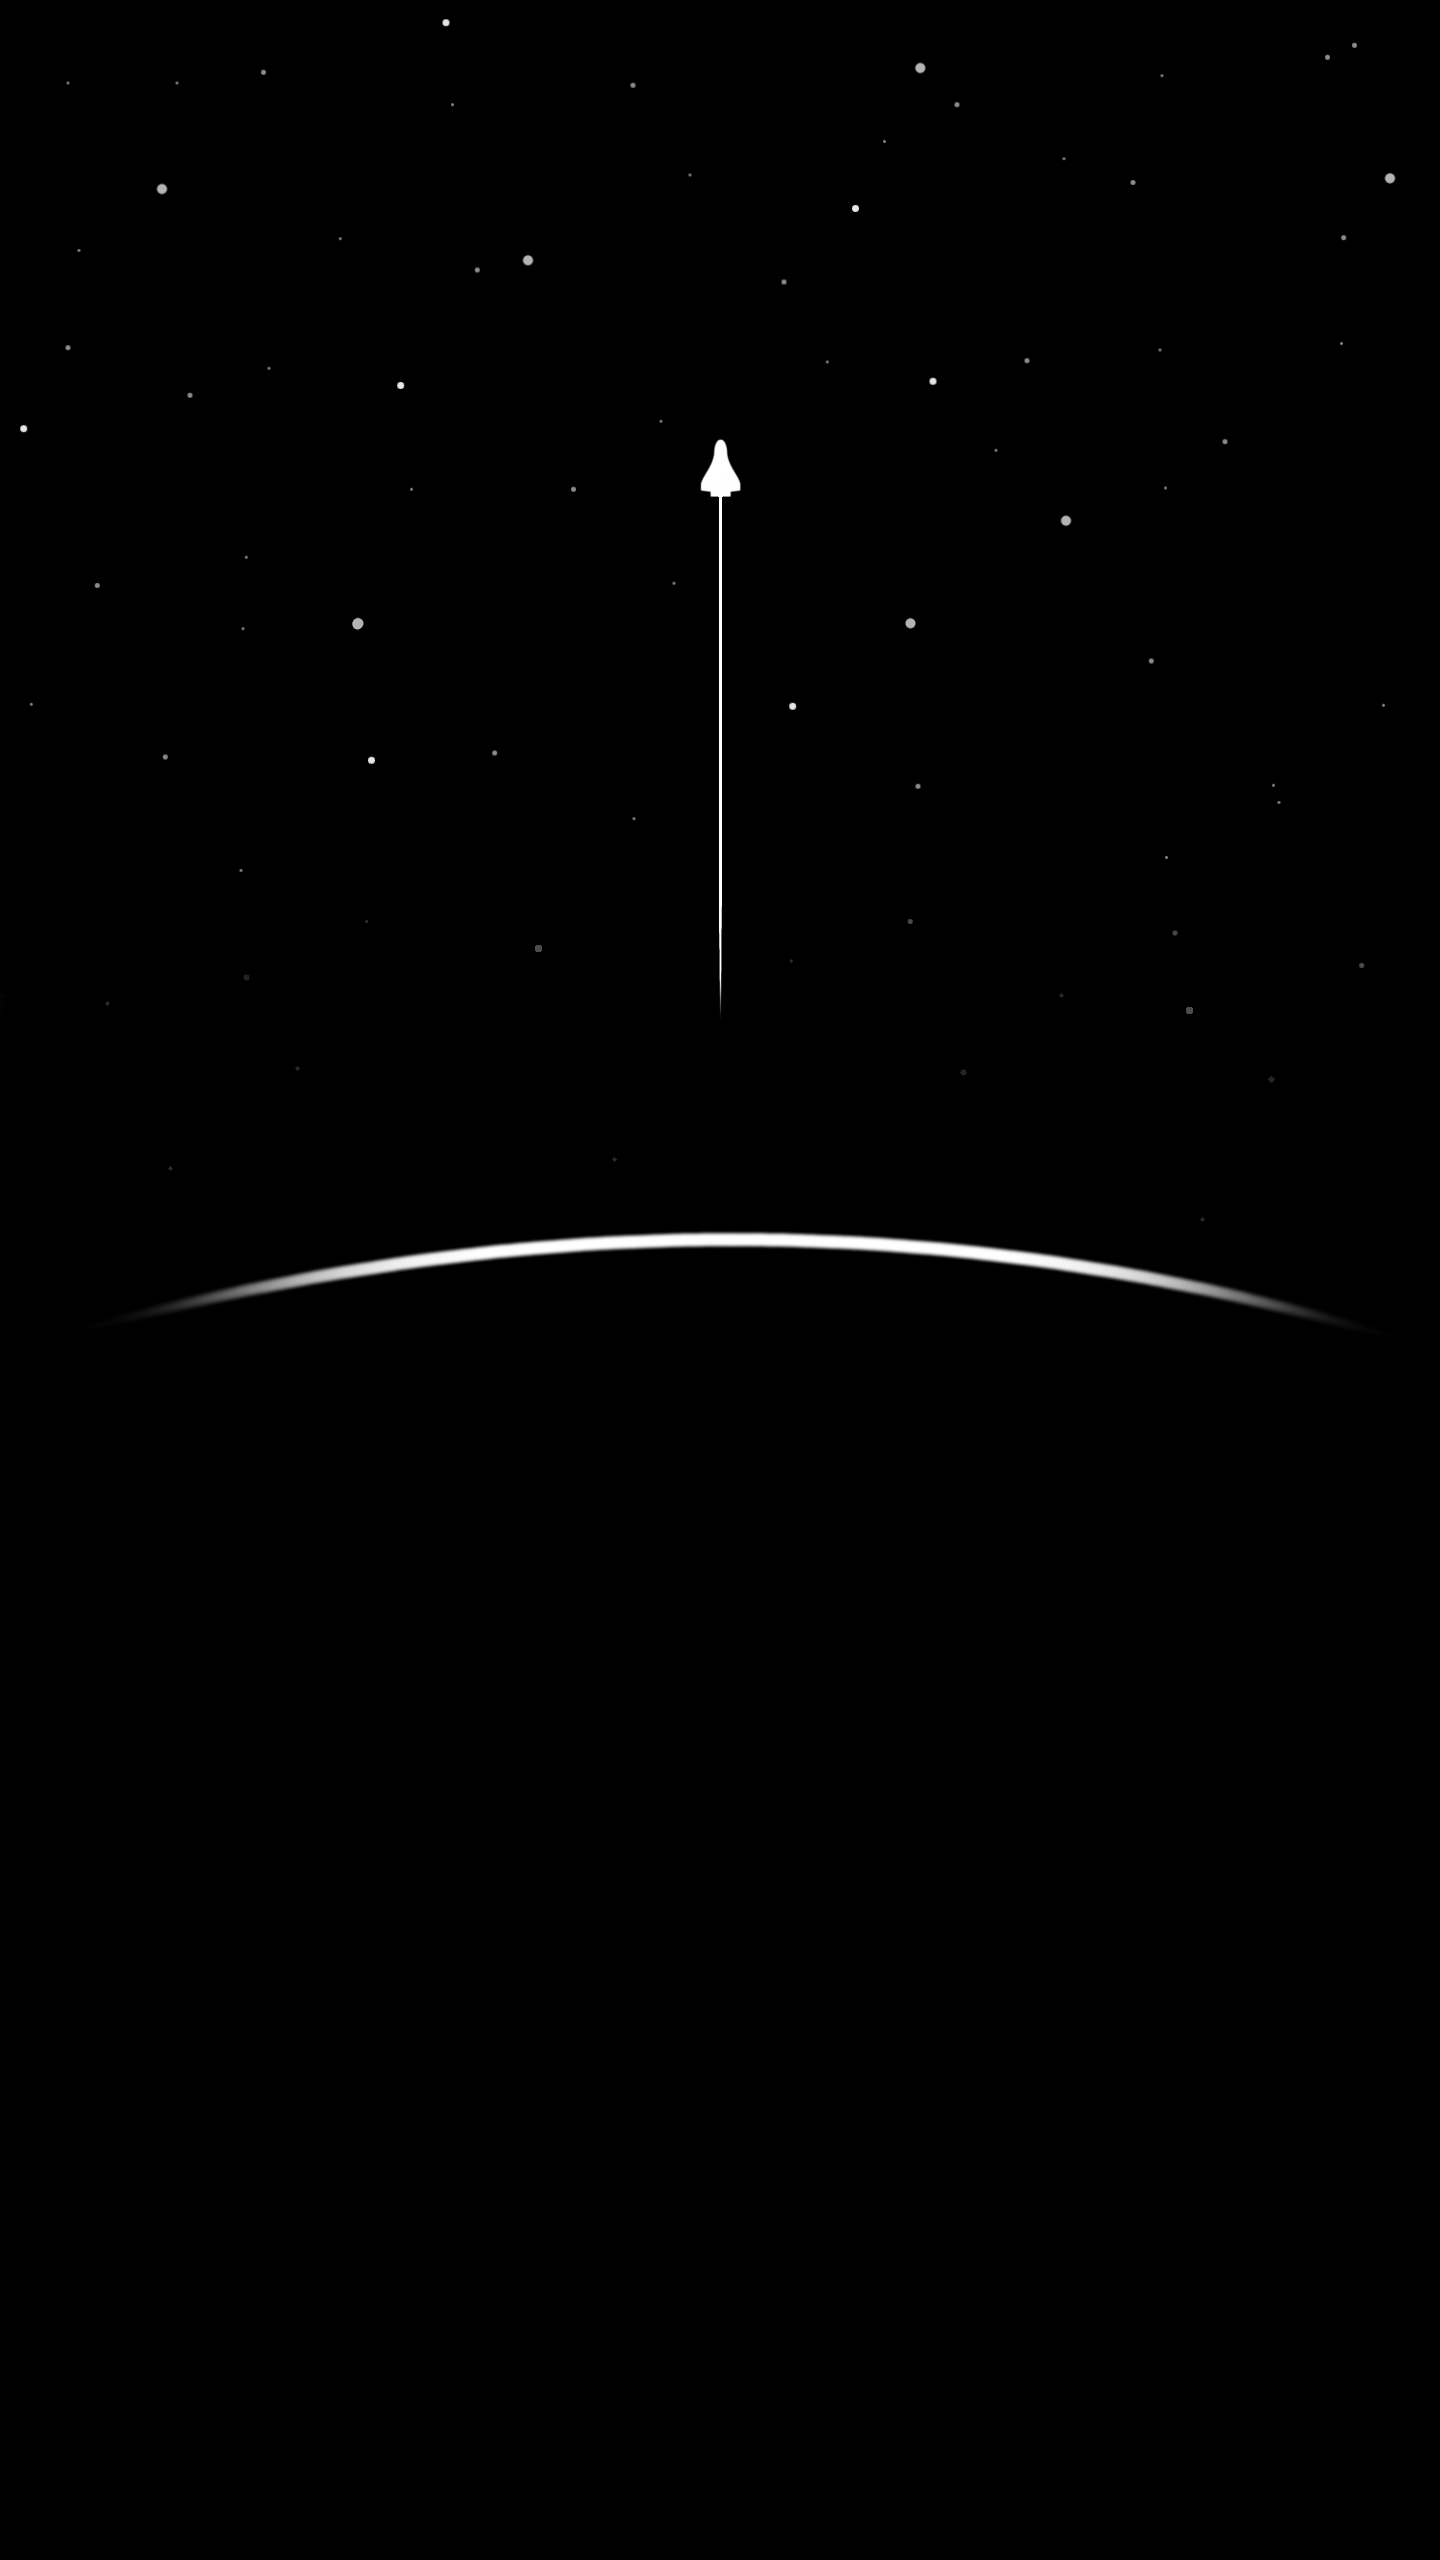 Black Amoled Wallpaper Group , Download for free. Dark black wallpaper, Dark background wallpaper, Black HD wallpaper